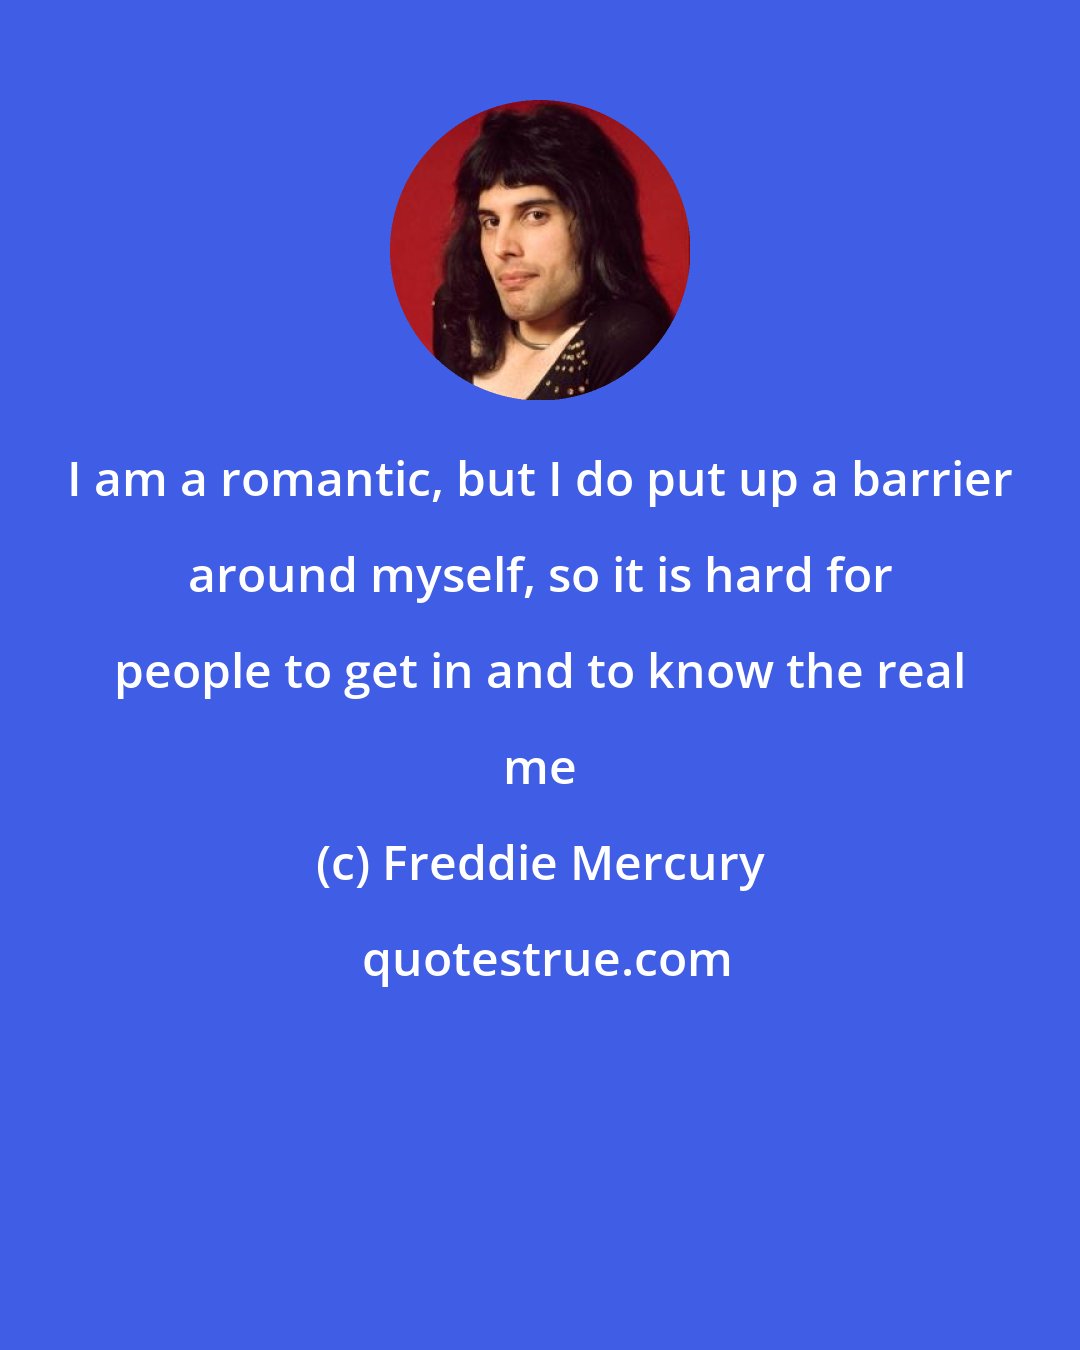 Freddie Mercury: I am a romantic, but I do put up a barrier around myself, so it is hard for people to get in and to know the real me